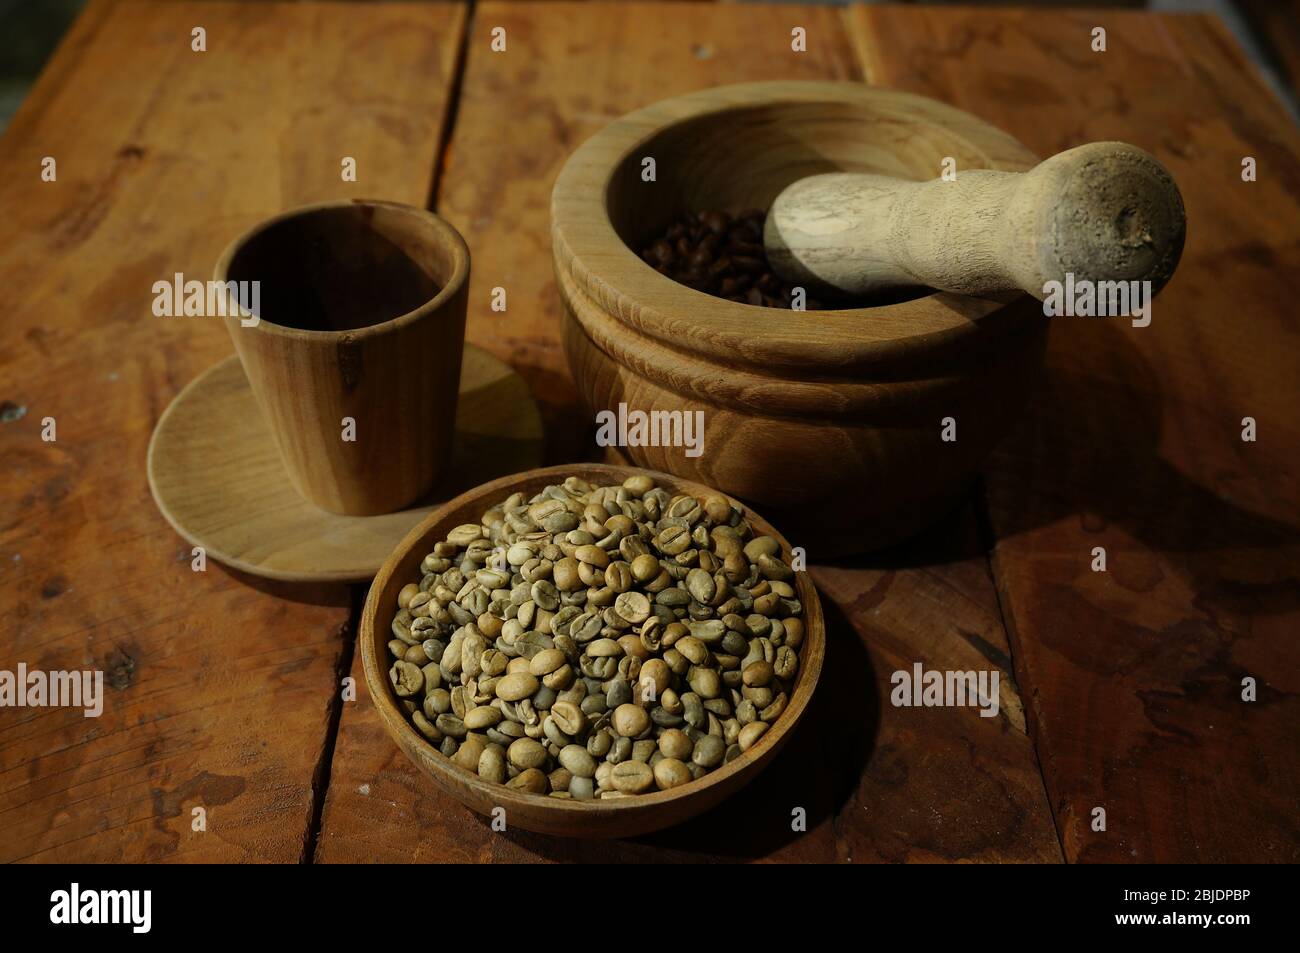 roasted coffee beans and raw ones Stock Photo